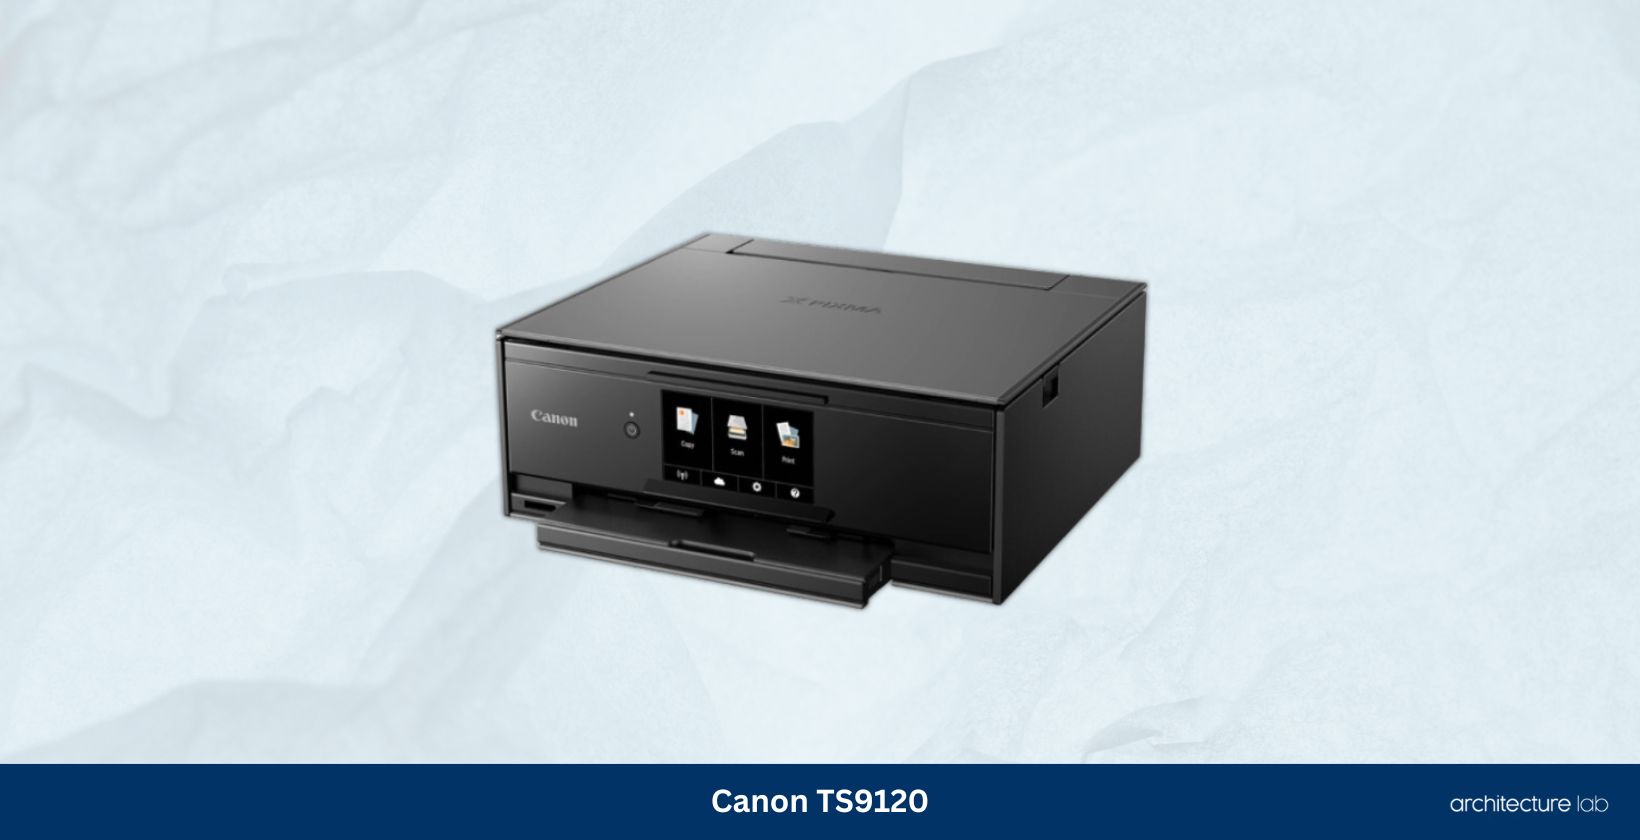 Canon ts9120 wireless all in one printer with scanner and copier